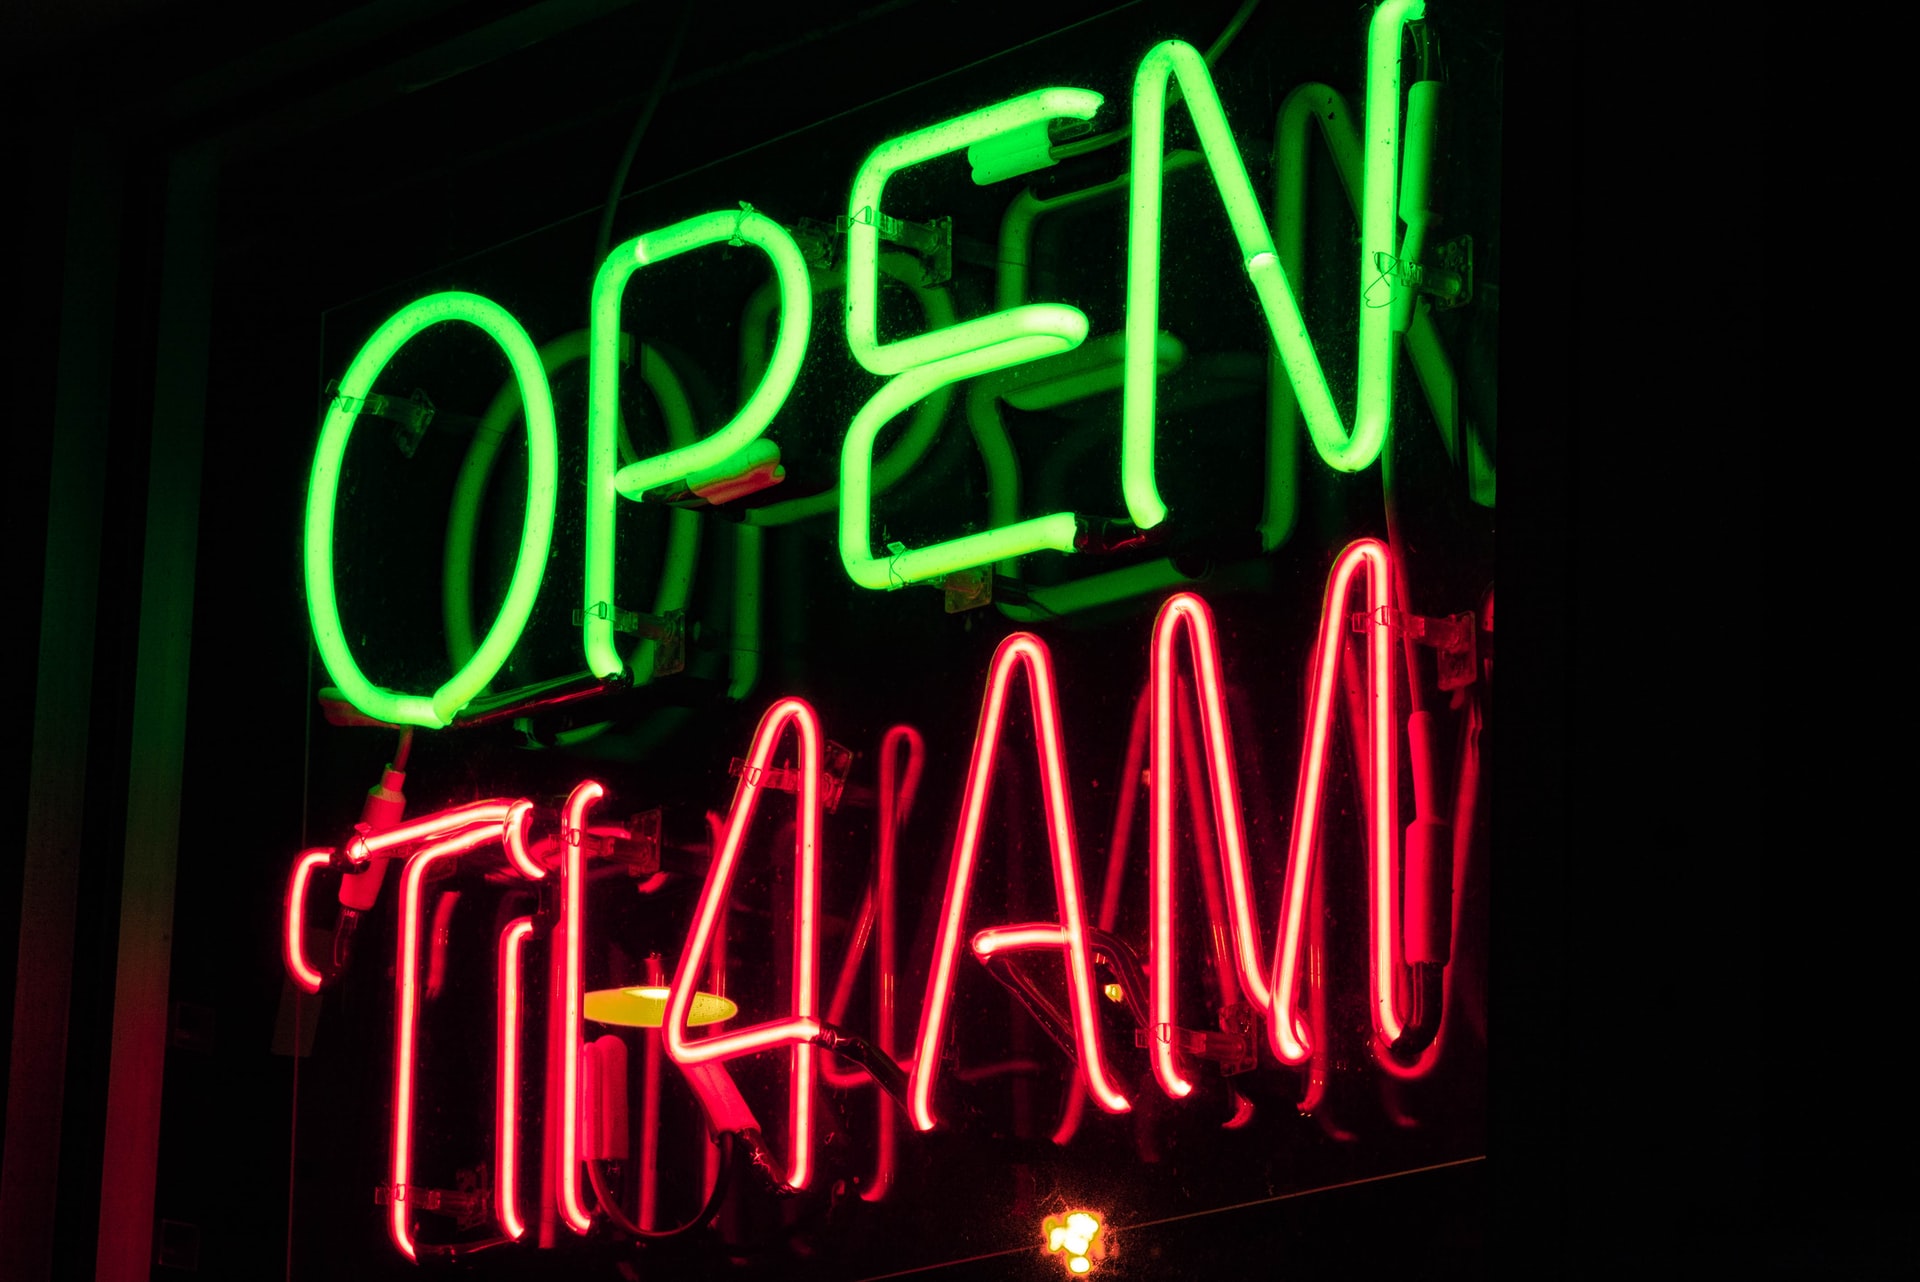 Neon Green and Red Open sign Roaring Twenties Photo by Mitchell Griest on Unsplash